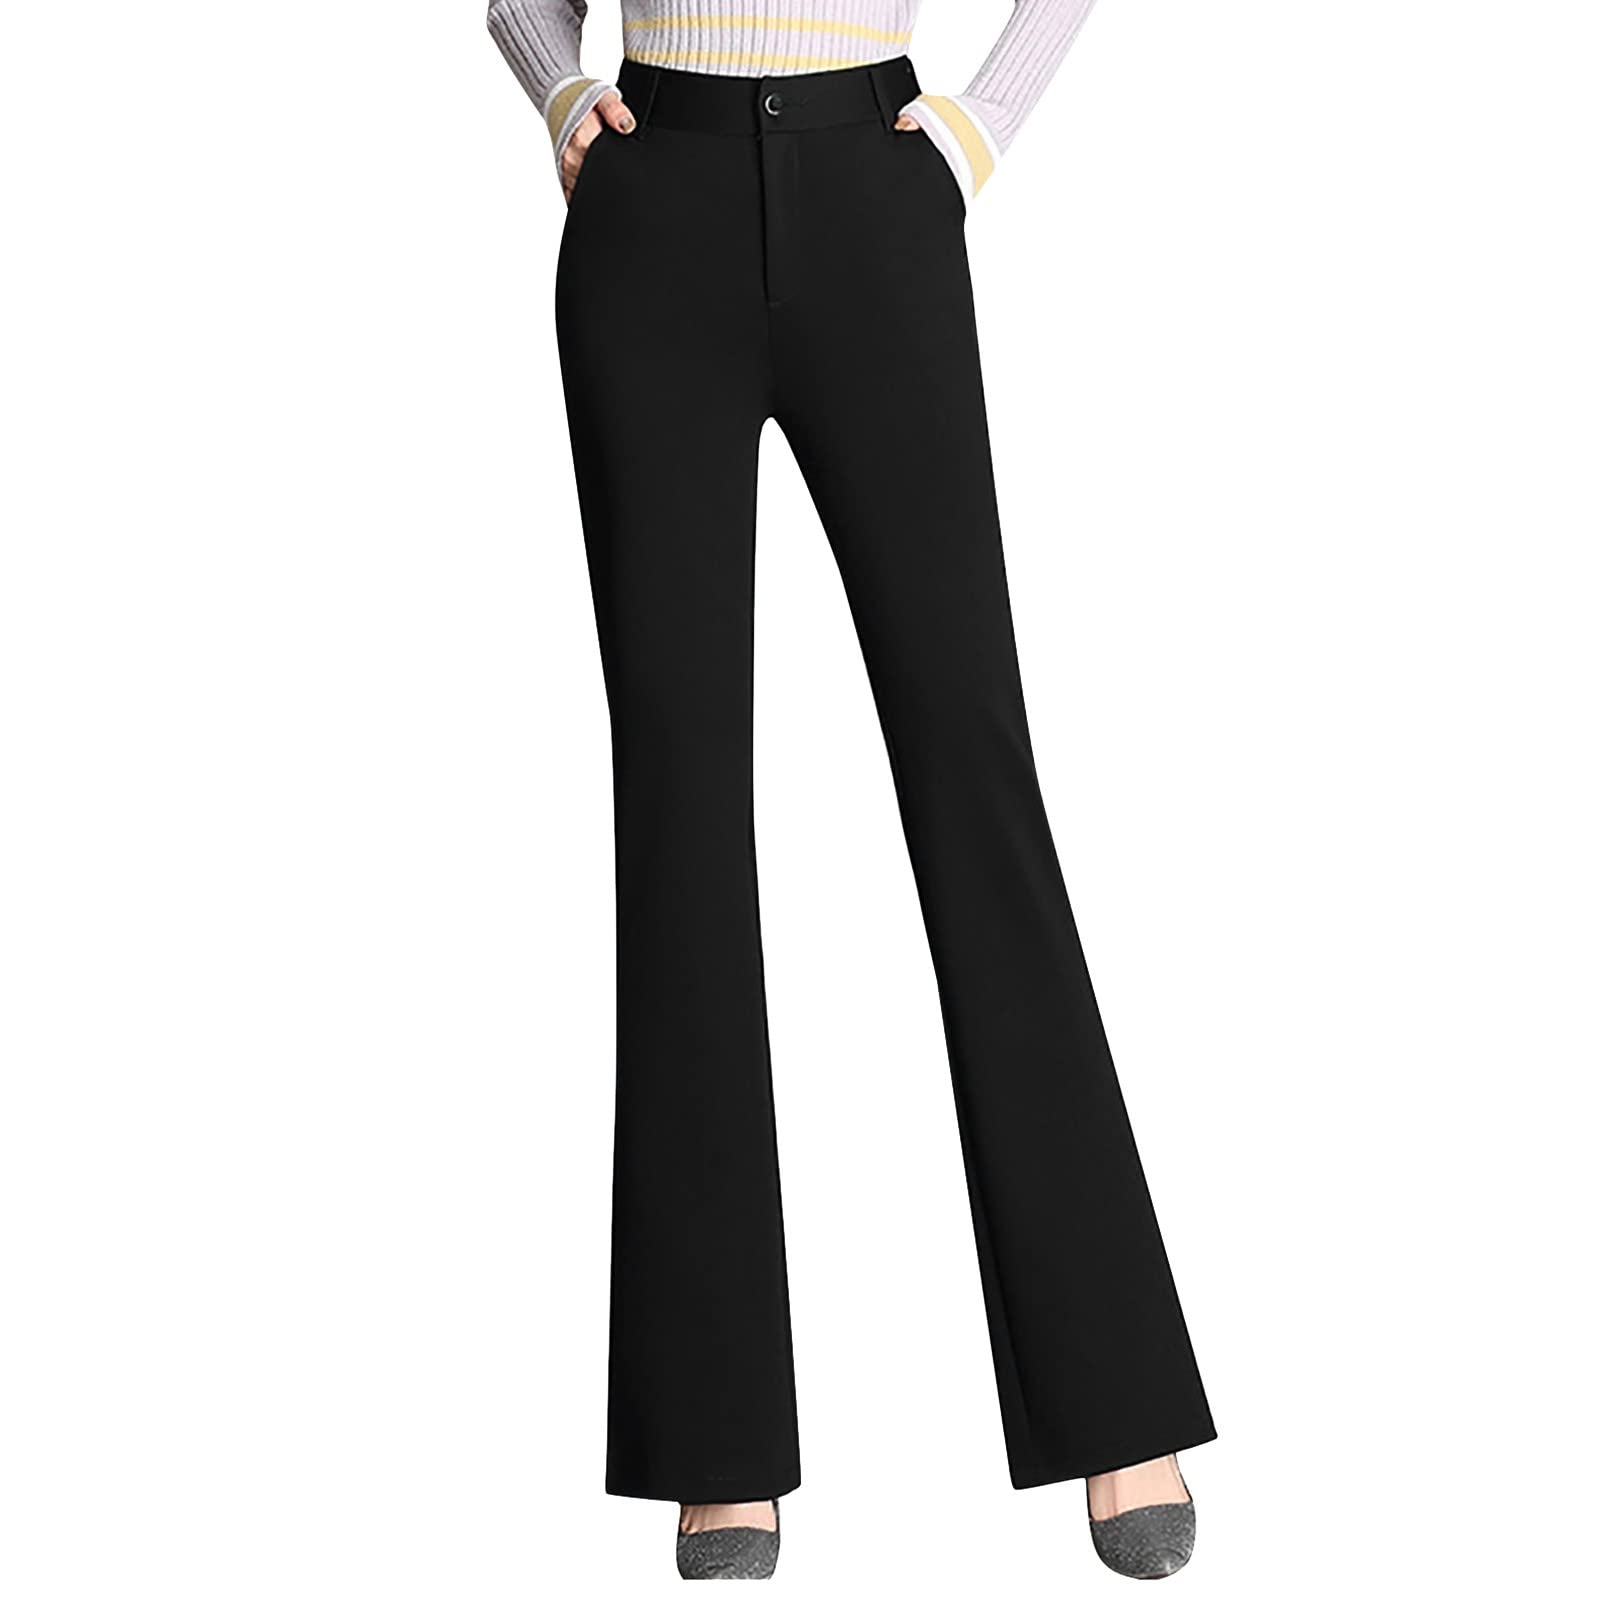 Women Office Pants for Work Business Casual High Waisted Straight Leg  Trouser Bootcut Stretchy Regular Fit Dress Pants